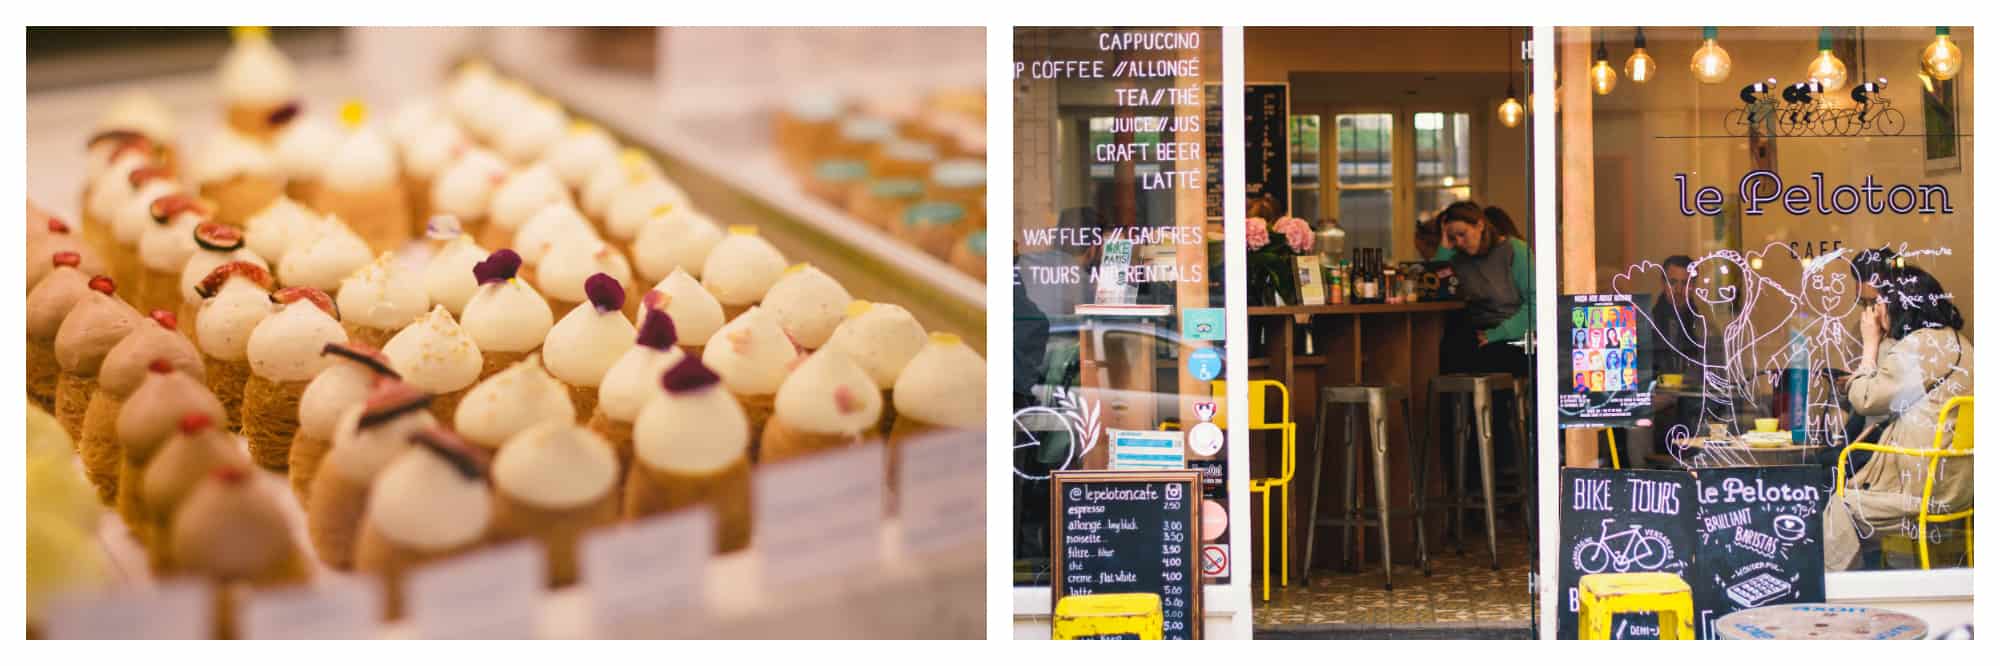 On left: cute, miniature pastries sit lined up in a shop window, each wearing a little hat of cream and dotted with a delicate morsel of fruit. On right: The popular coffee shop Le Peloton in Paris' Le Marias neighbhorhood opens its doors into the inviting, warm interior accented by the yellow furniture. 